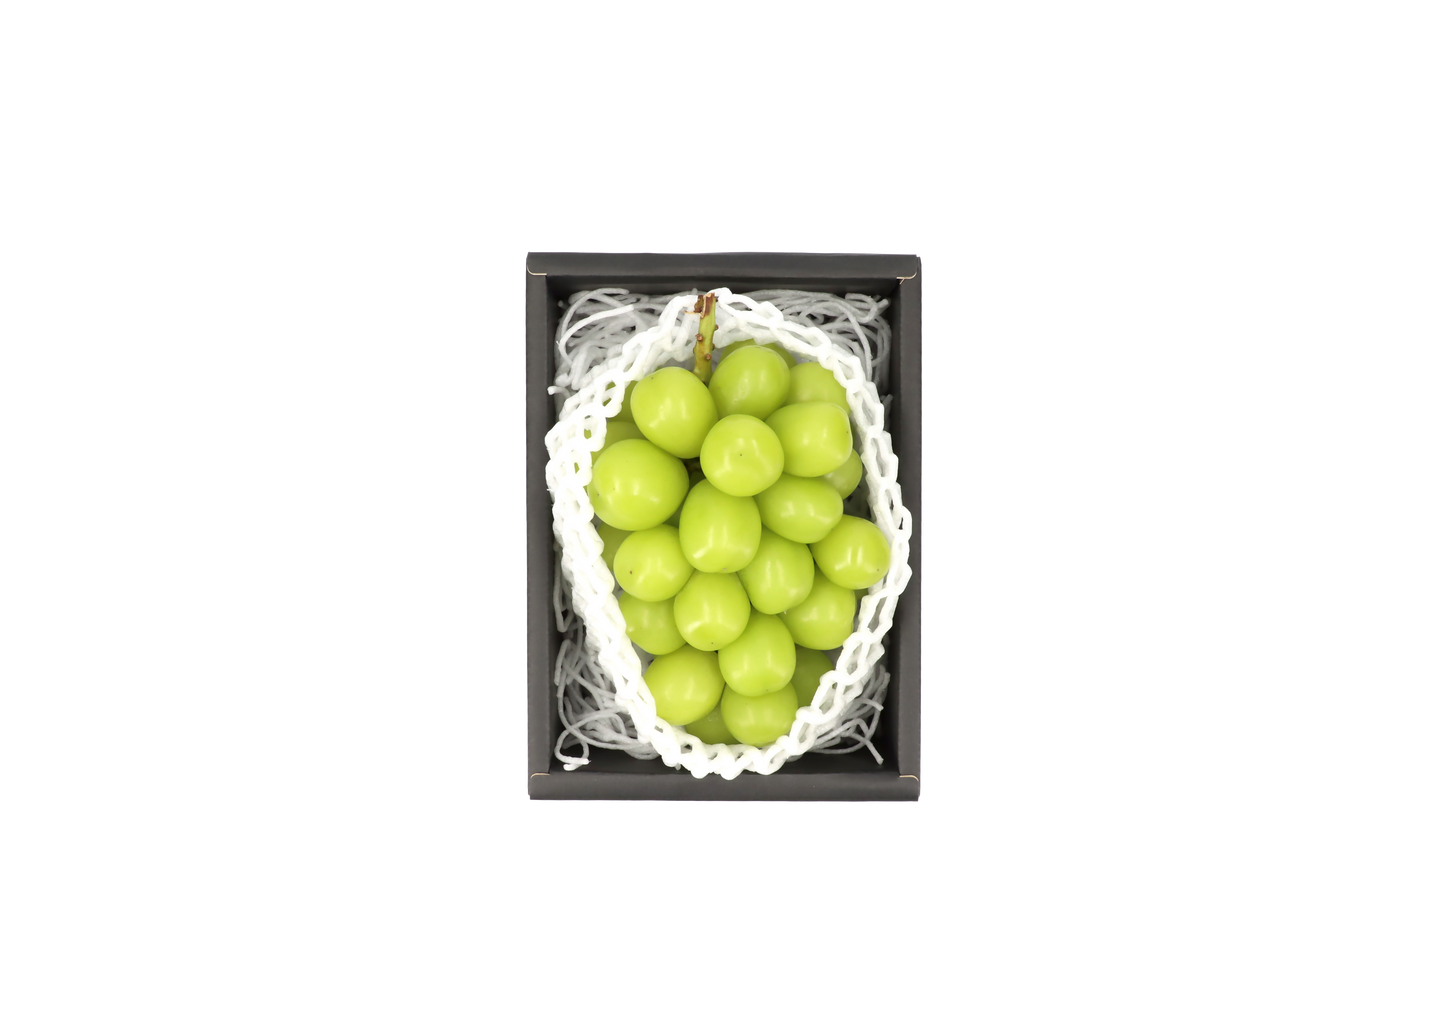 【Limited Sets Order Deadline Jan. 30! For Thailand Customers Only Shipping Included　‐ Delivery scheduled for early February, Great Gift for Lunar New Year】Farm to Table Yamanashi Shine Muscat Grapes| Taste of Japan